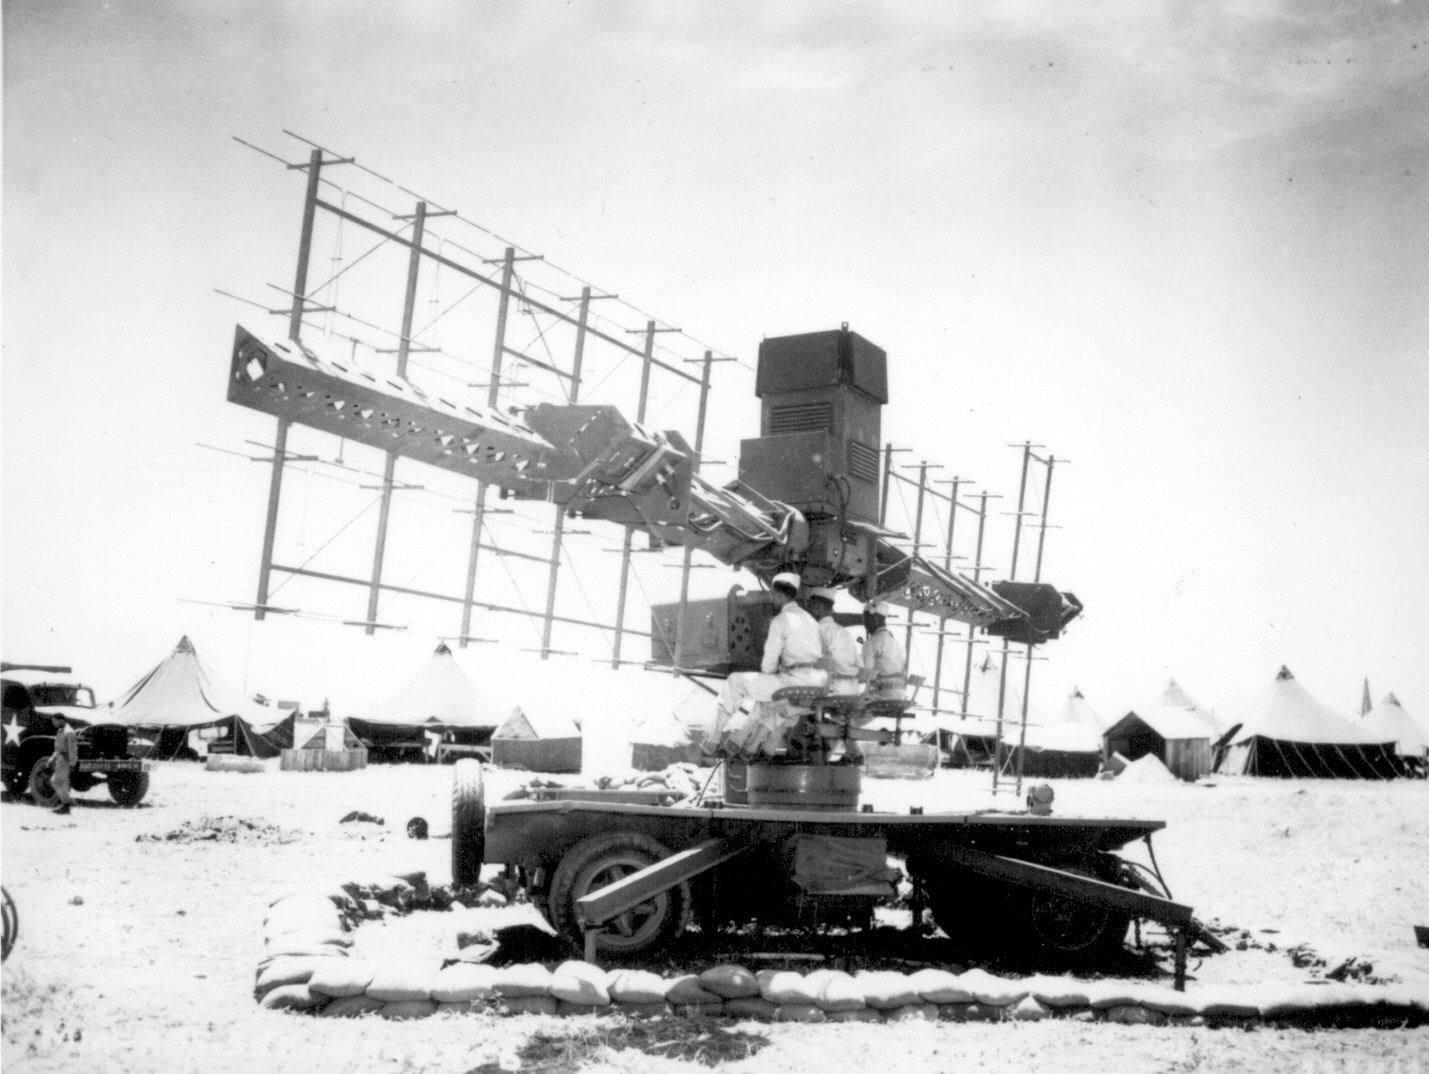 Three soldiers manning US Army 90th Coast Artillery's radar, Casablanca, French Morocco, 19 Jun 1943; note the three men were African-American